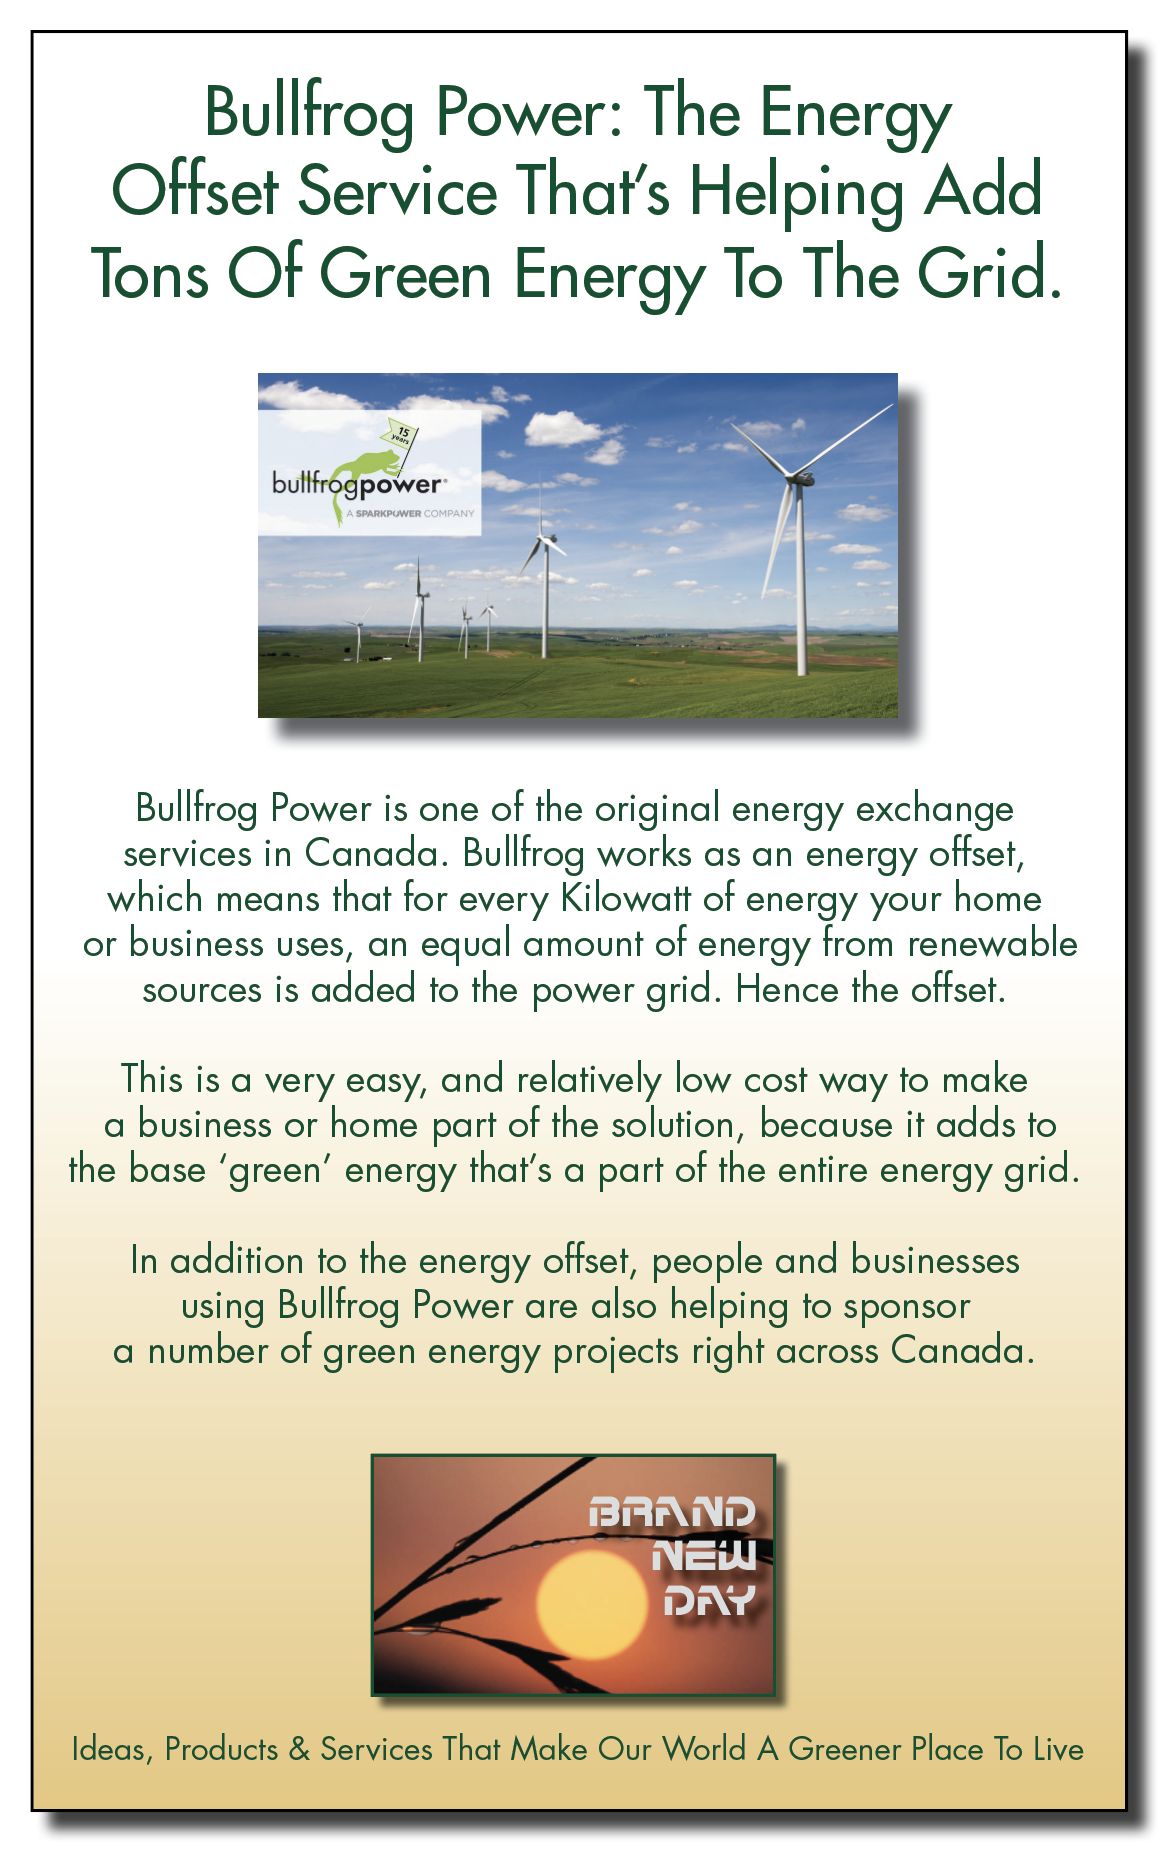 Bullfrog Power: The Energy
Offset Service That's Helping Add

Tons Of Green Energy To The Grid.

-

~3

bullfrog bower

Bullfrog Power is one of the original energy exchange
services in Canada. Bullfrog works as an energy offset,
which means that for every Kilowatt of energy your home
or business uses, an equal amount of energy from renewable
sources is added to the power grid. Hence the offset.

This is a very easy, and relatively low cost way to make
a business or home part of the solution, because it adds to
the base ‘green’ energy that's a part of the entire energy grid.
In addition to the energy offset, people and businesses

using Bullfrog Power are also helping to sponsor
a number of green energy projects right across Canada.

ERAN) [Pp]
NEl
CE

Ideas, Products & Services That Make Our World A Greener Place To Live